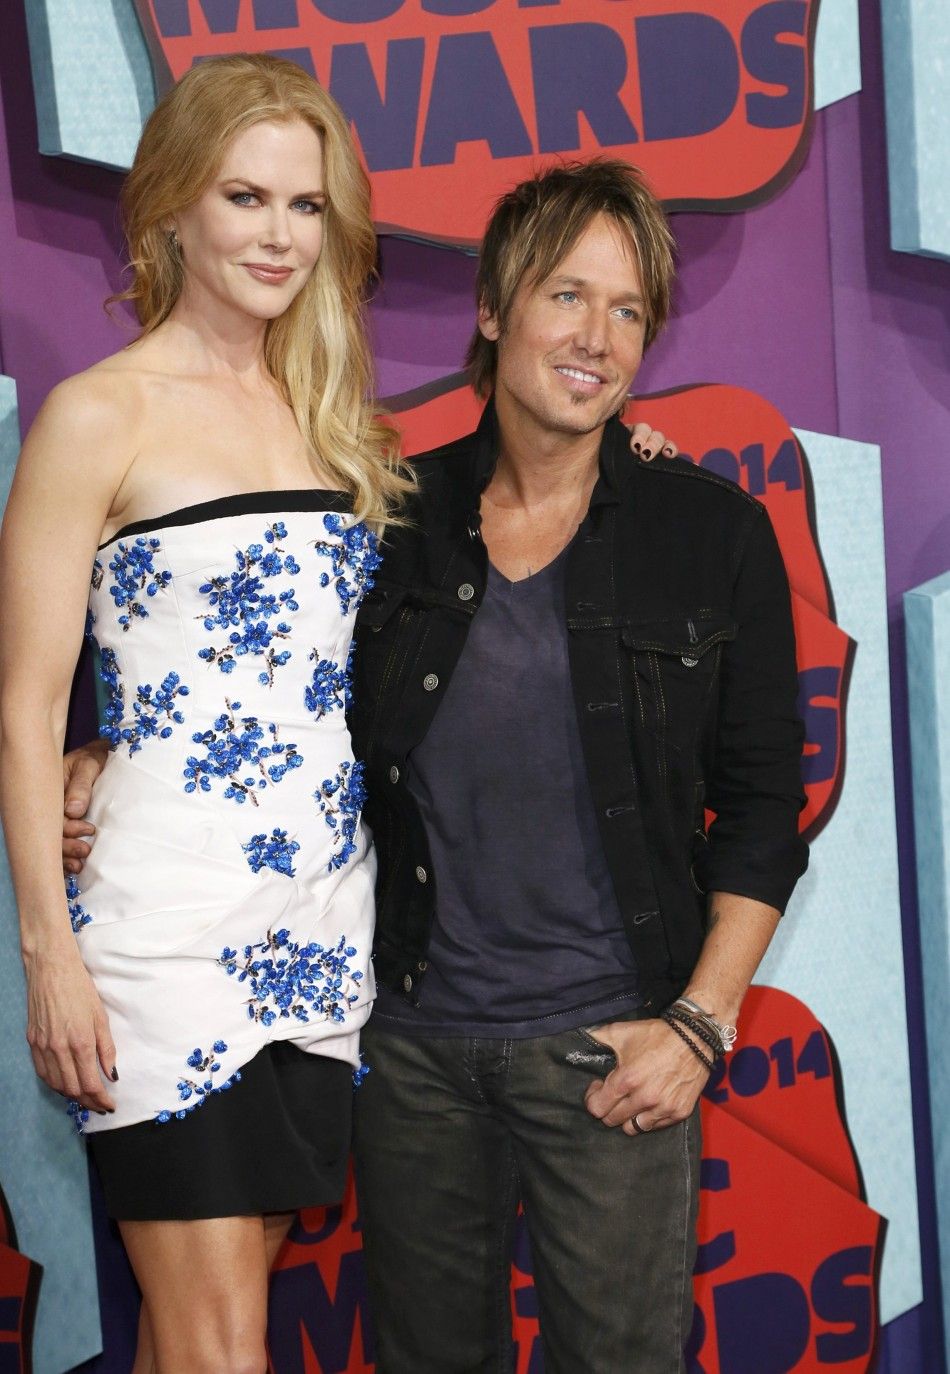 Actress Nicole Kidman and her husband, musician Keith Urban, arrive at the 2014 CMT Music Awards in Nashville